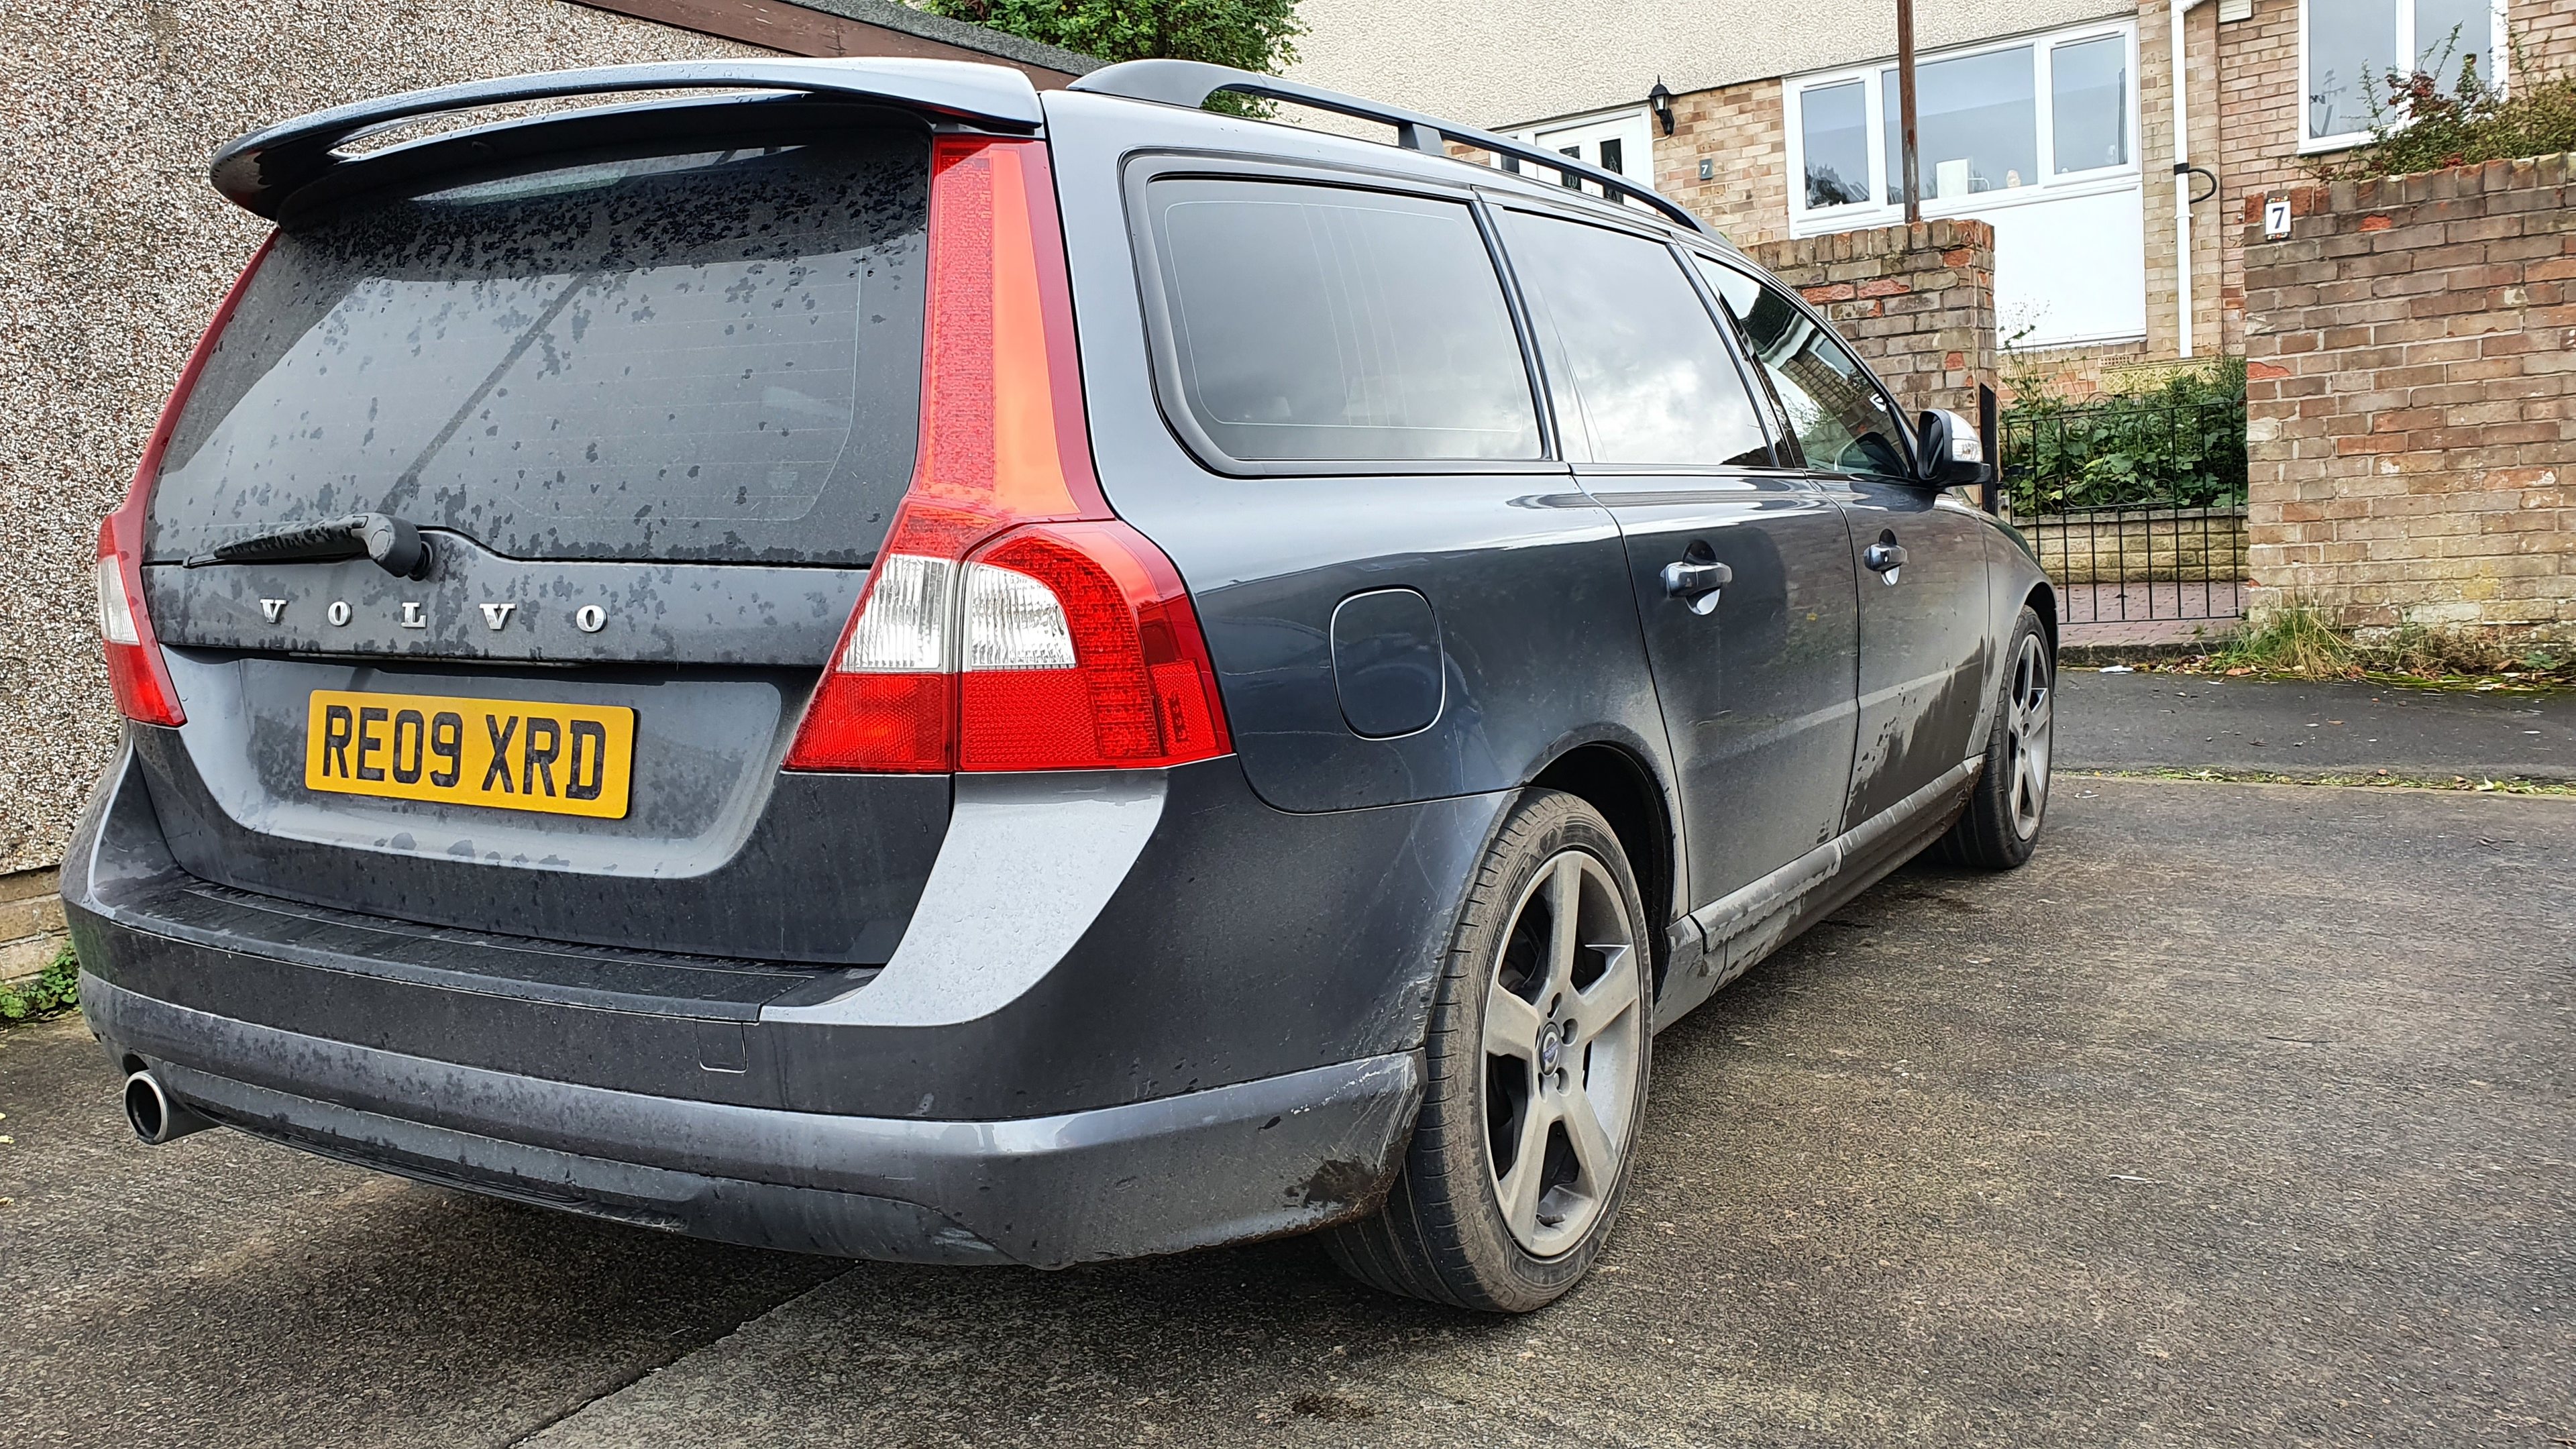 Show us your Ovlov thread. - Page 29 - Volvo - PistonHeads UK